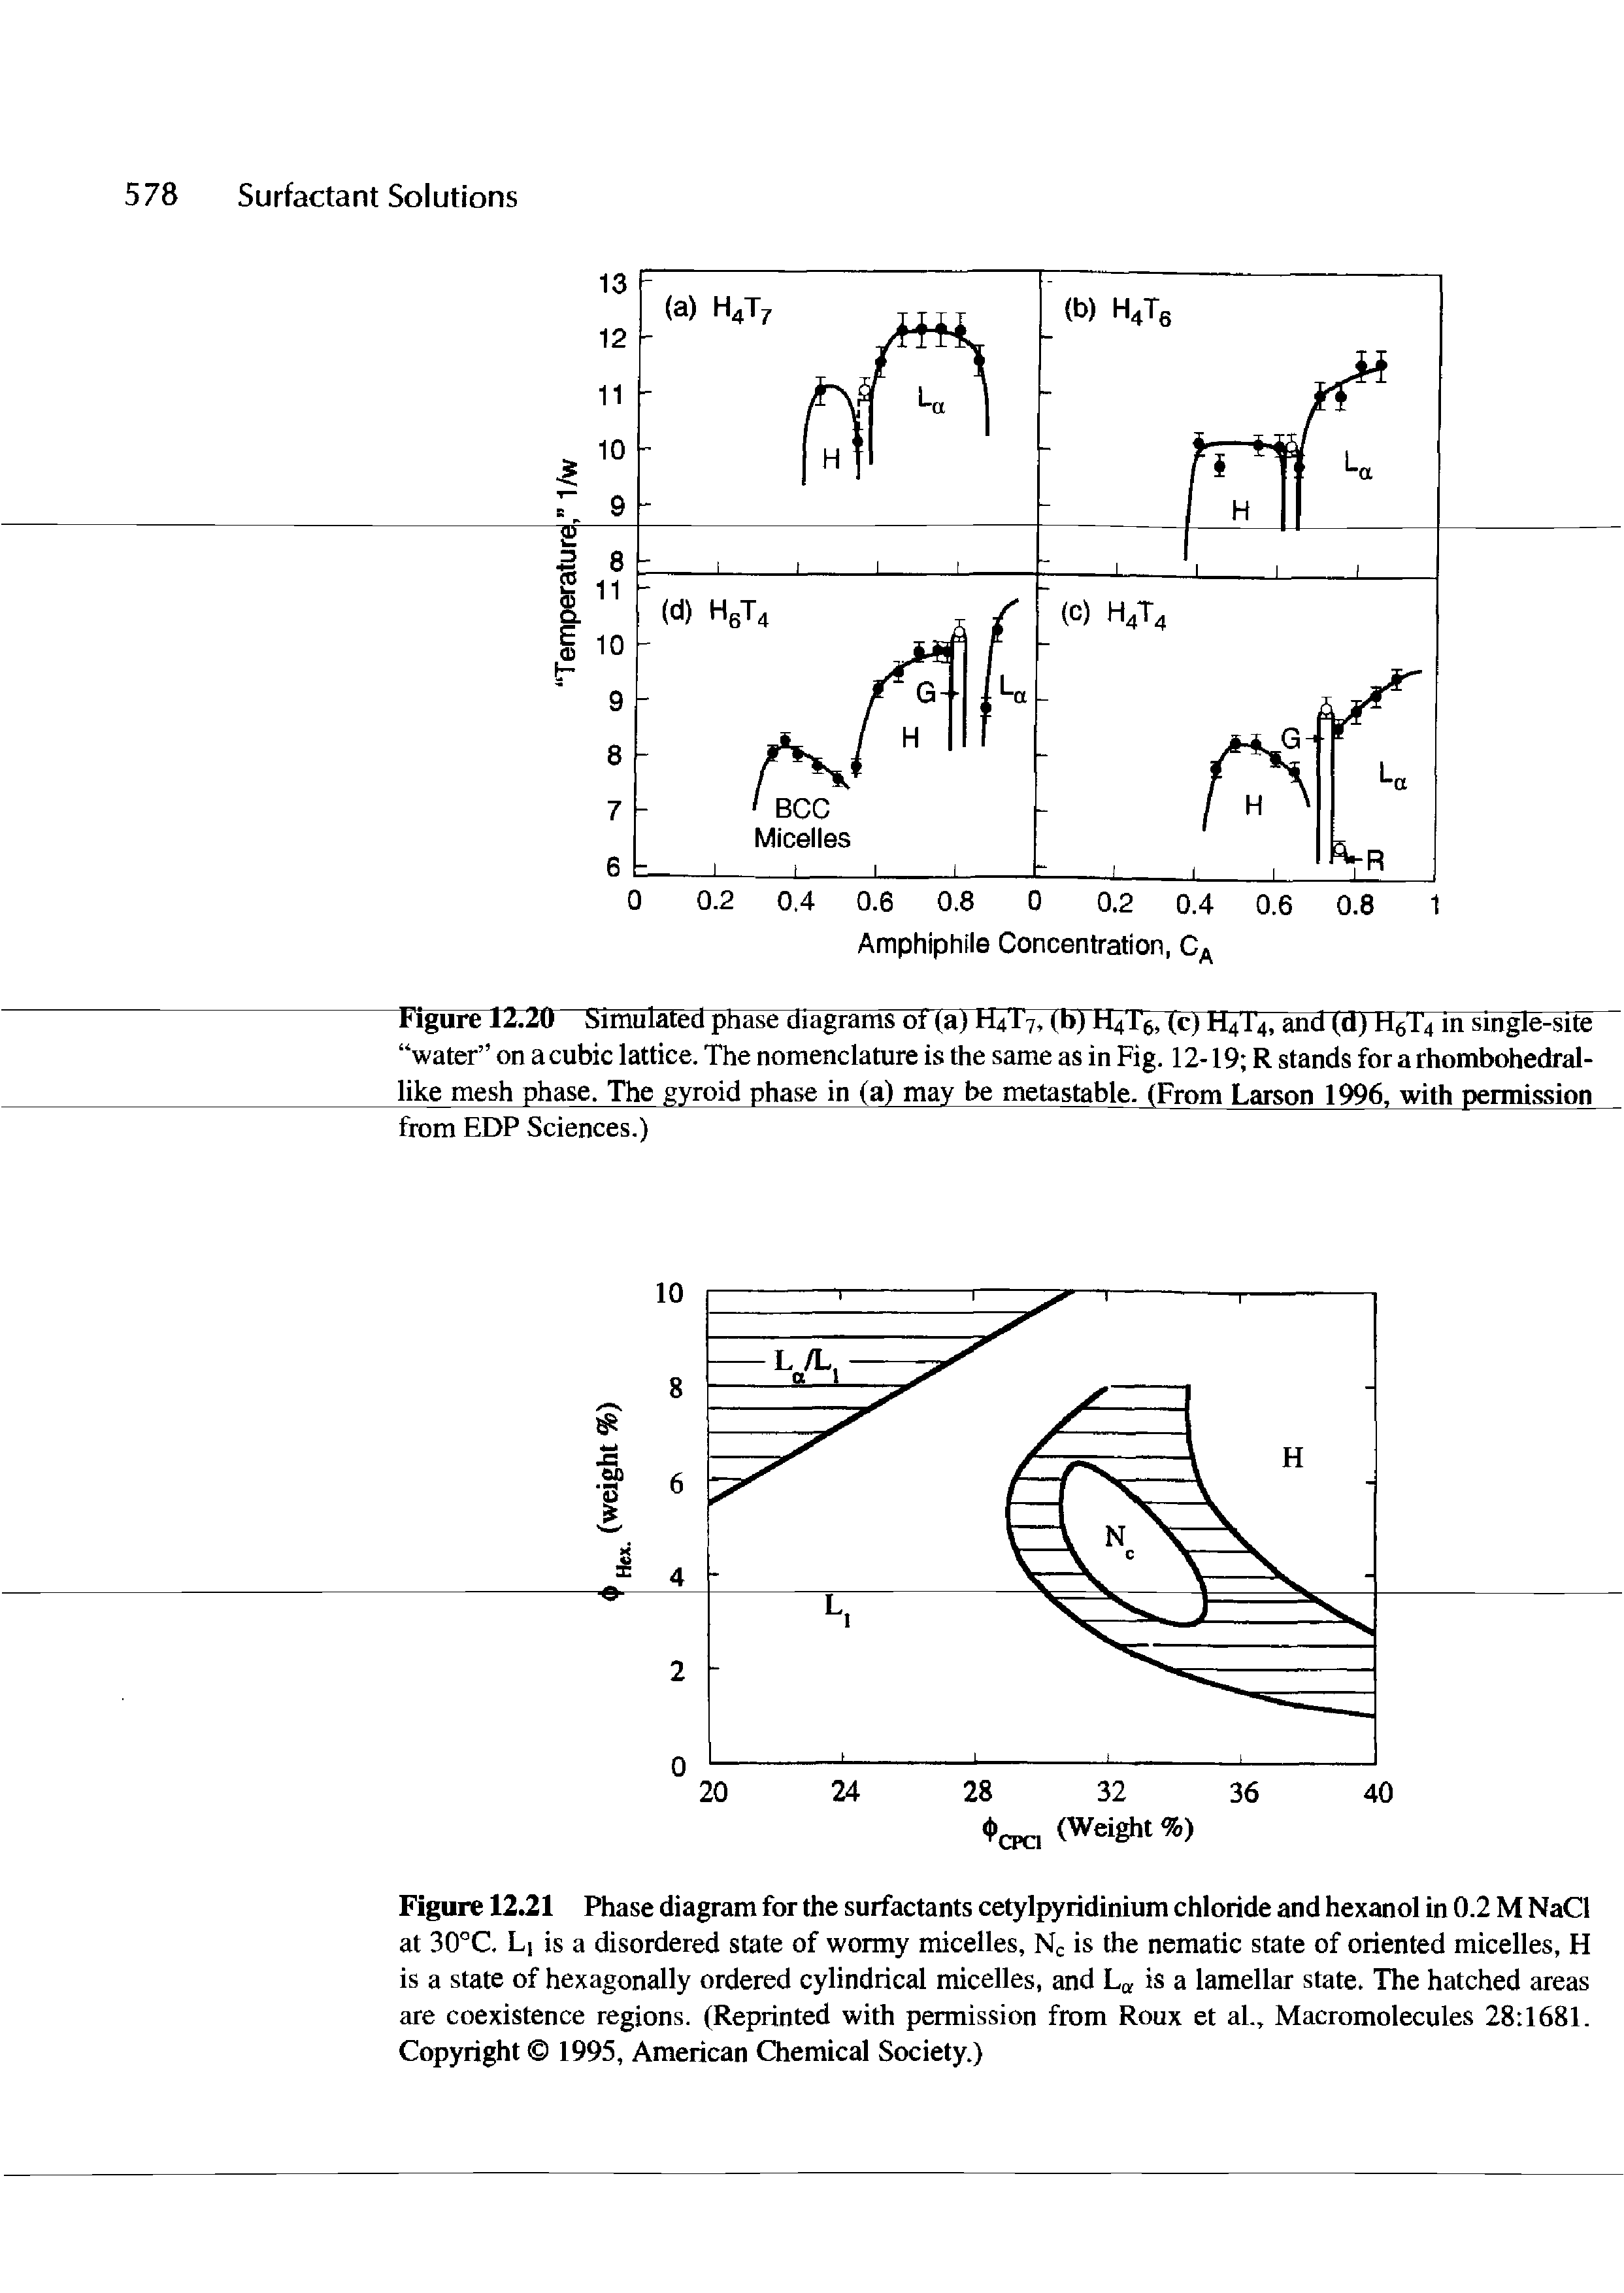 Figure 12.21 Phase diagram for the surfactants cetylpyridinium chloride and hexanol in 0.2 M NaCl at 30°C. Li is a disordered state of wormy micelles, Nc is the nematic state of oriented micelles, H is a state of hexagonally ordered cylindrical micelles, and L is a lamellar state. The hatched areas are coexistence regions. (Reprinted with permission from Roux et al.. Macromolecules 28 1681. Copyright 1995, American Chemical Society.)...